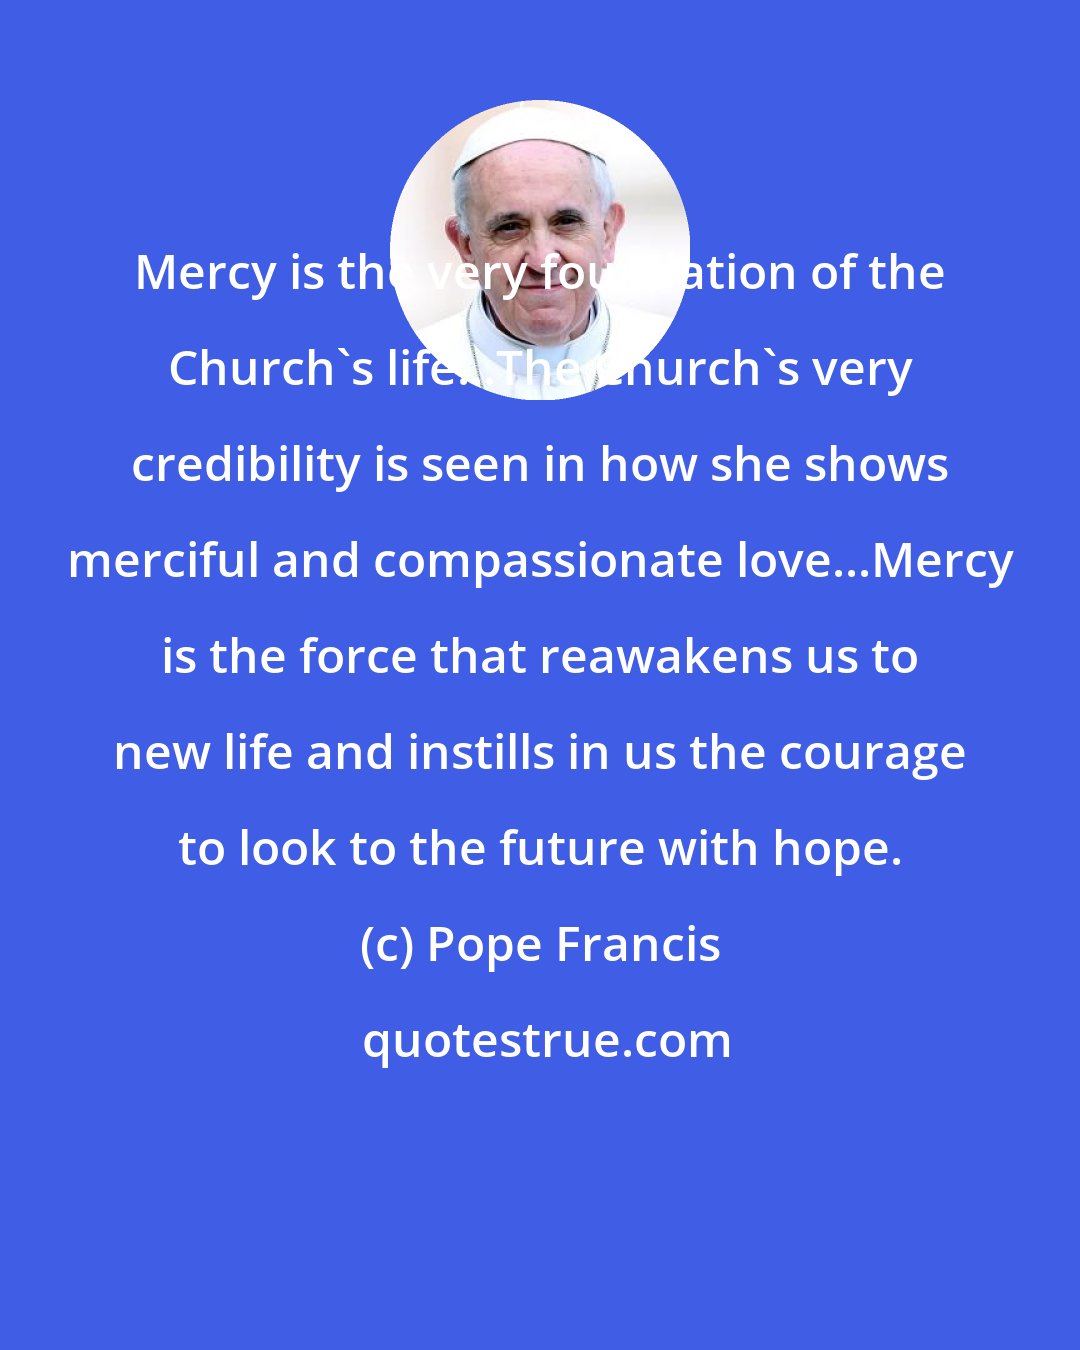 Pope Francis: Mercy is the very foundation of the Church's life...The Church's very credibility is seen in how she shows merciful and compassionate love...Mercy is the force that reawakens us to new life and instills in us the courage to look to the future with hope.